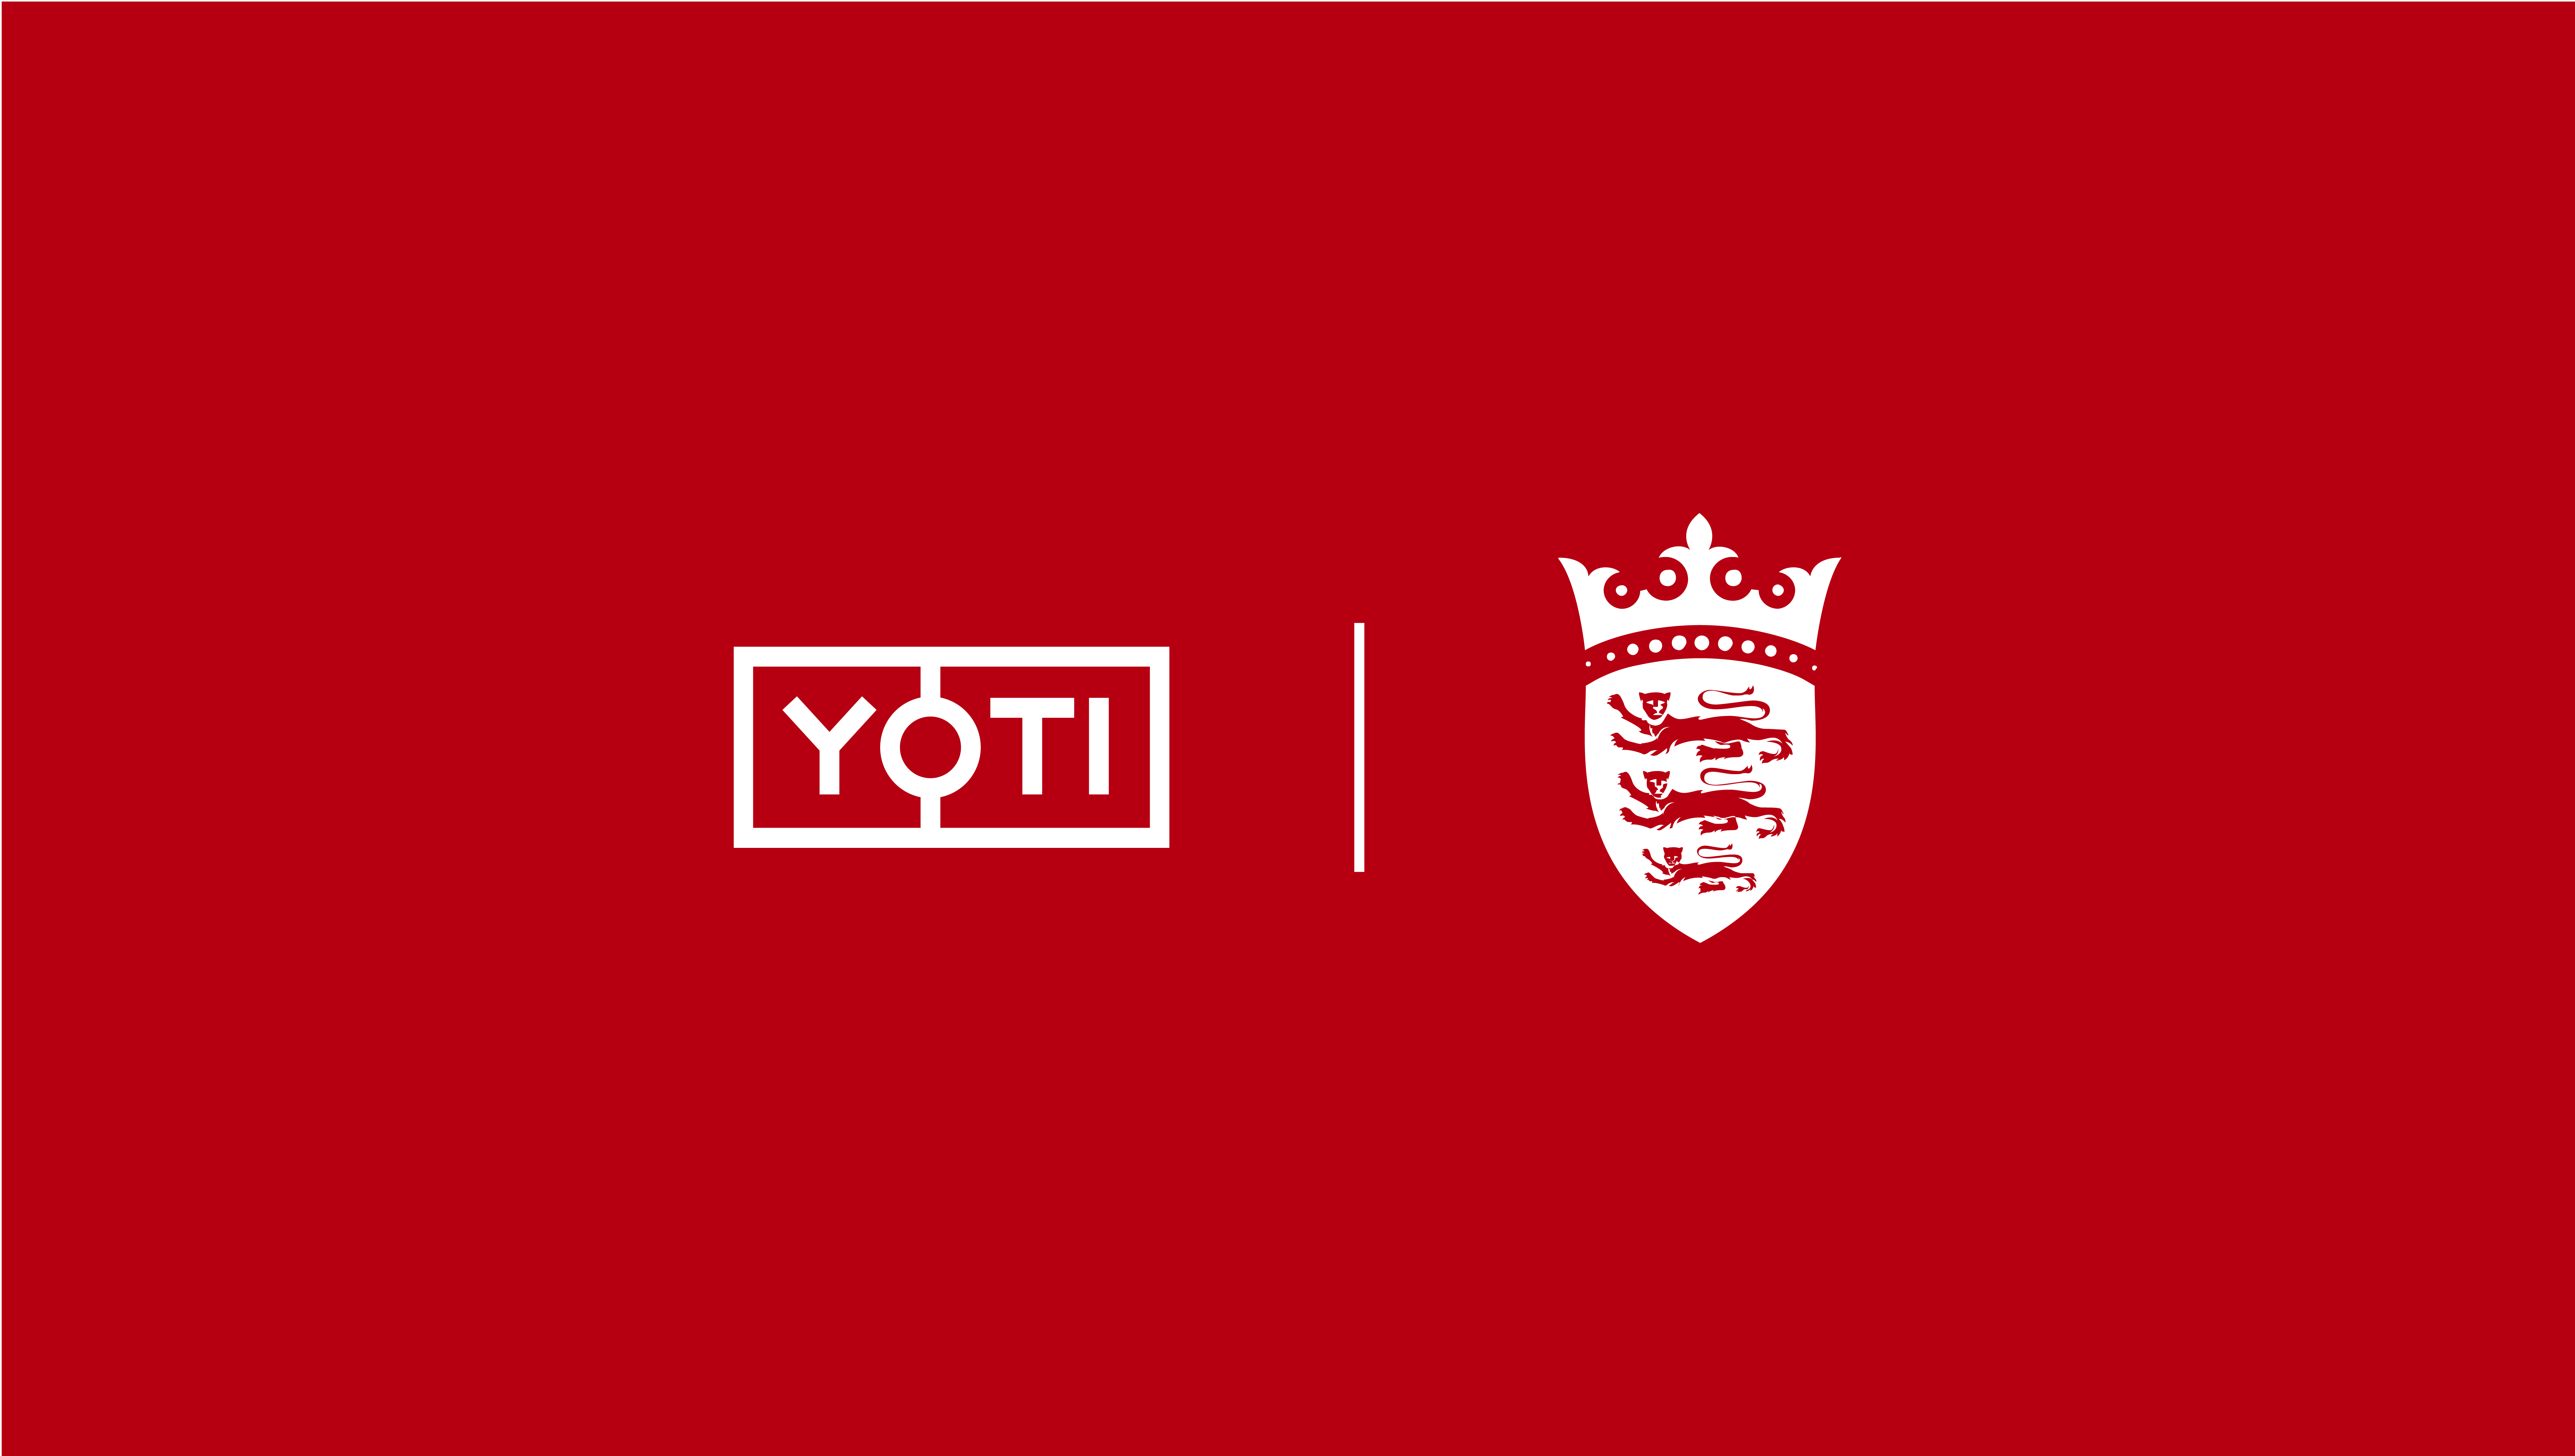 Local businesses in Jersey tackle underage sales with the Yoti digital identity app